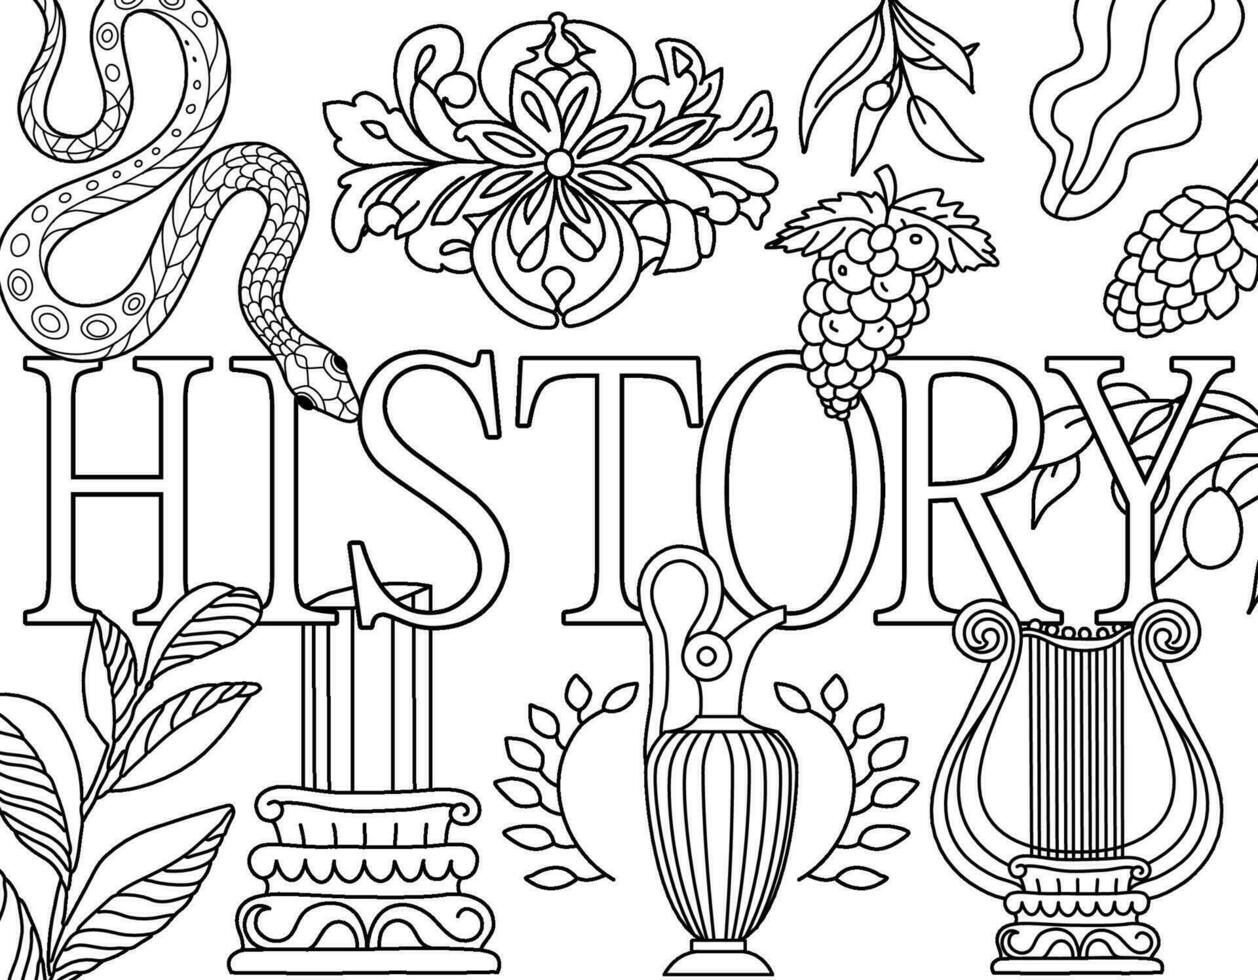 History. Ancient Greece Coloring page. Hand illustrations, Athens antique temple, Corinthian column, pillar. Beautiful drawing with patterns and small details. Coloring book picture vector